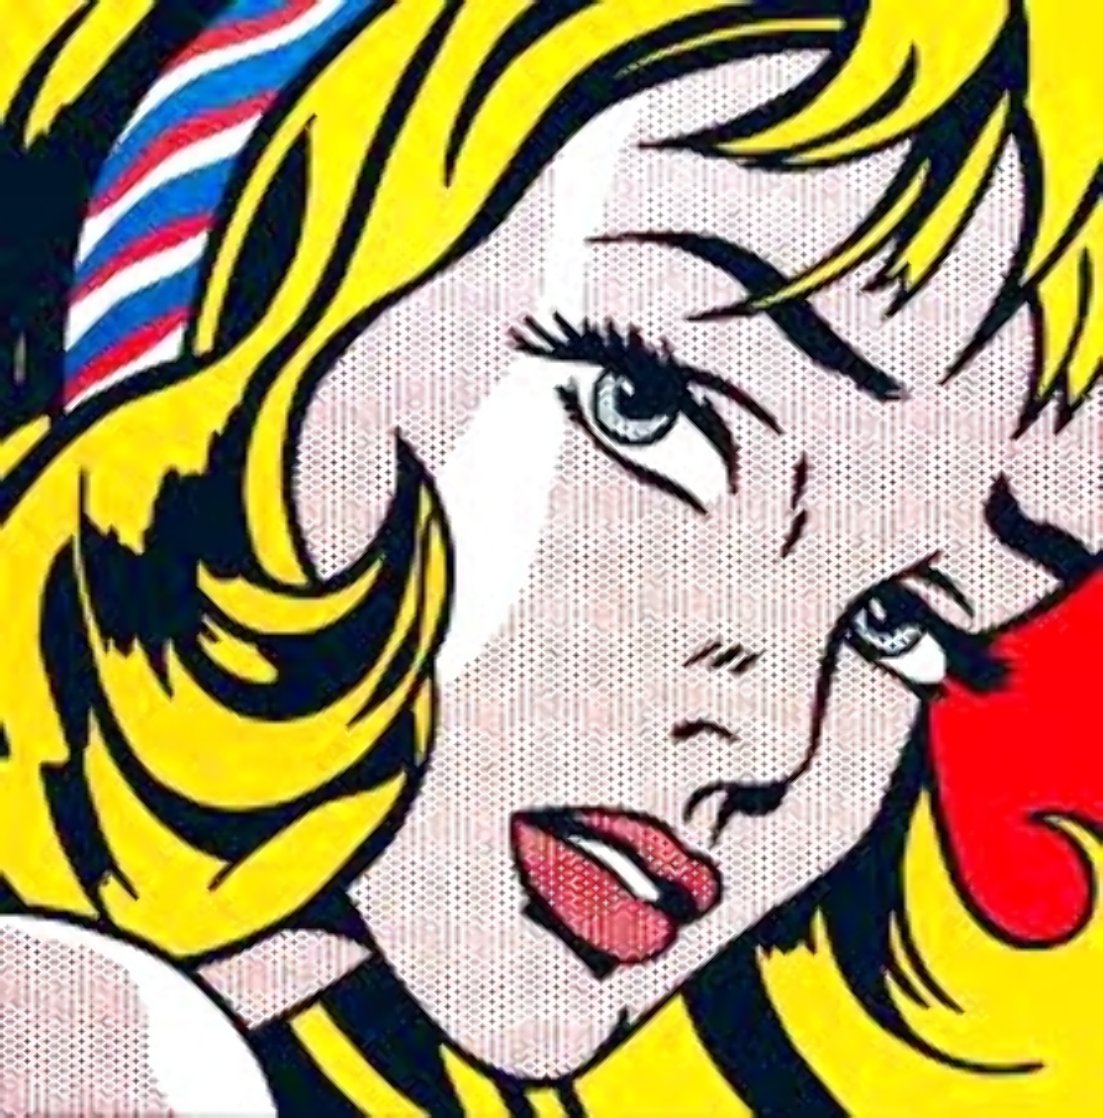 Girl With Hair Ribbon Poster  Limited Edition Print by Roy Lichtenstein